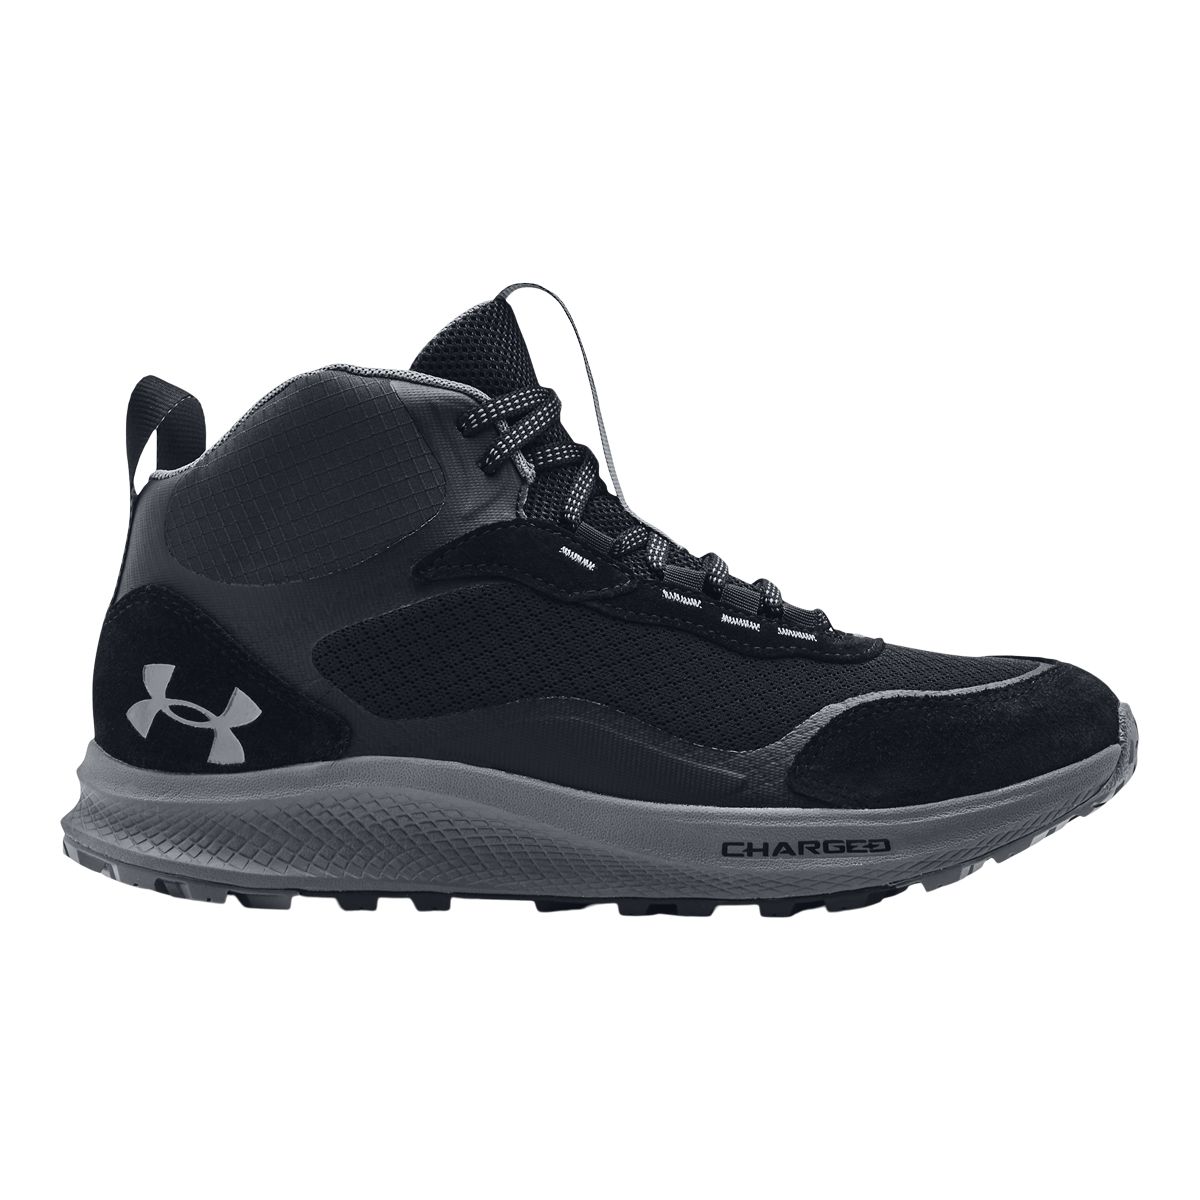 Image of Under Armour Men's Charged Bandit Trek 2 Lightweight Mesh Hiking Shoes